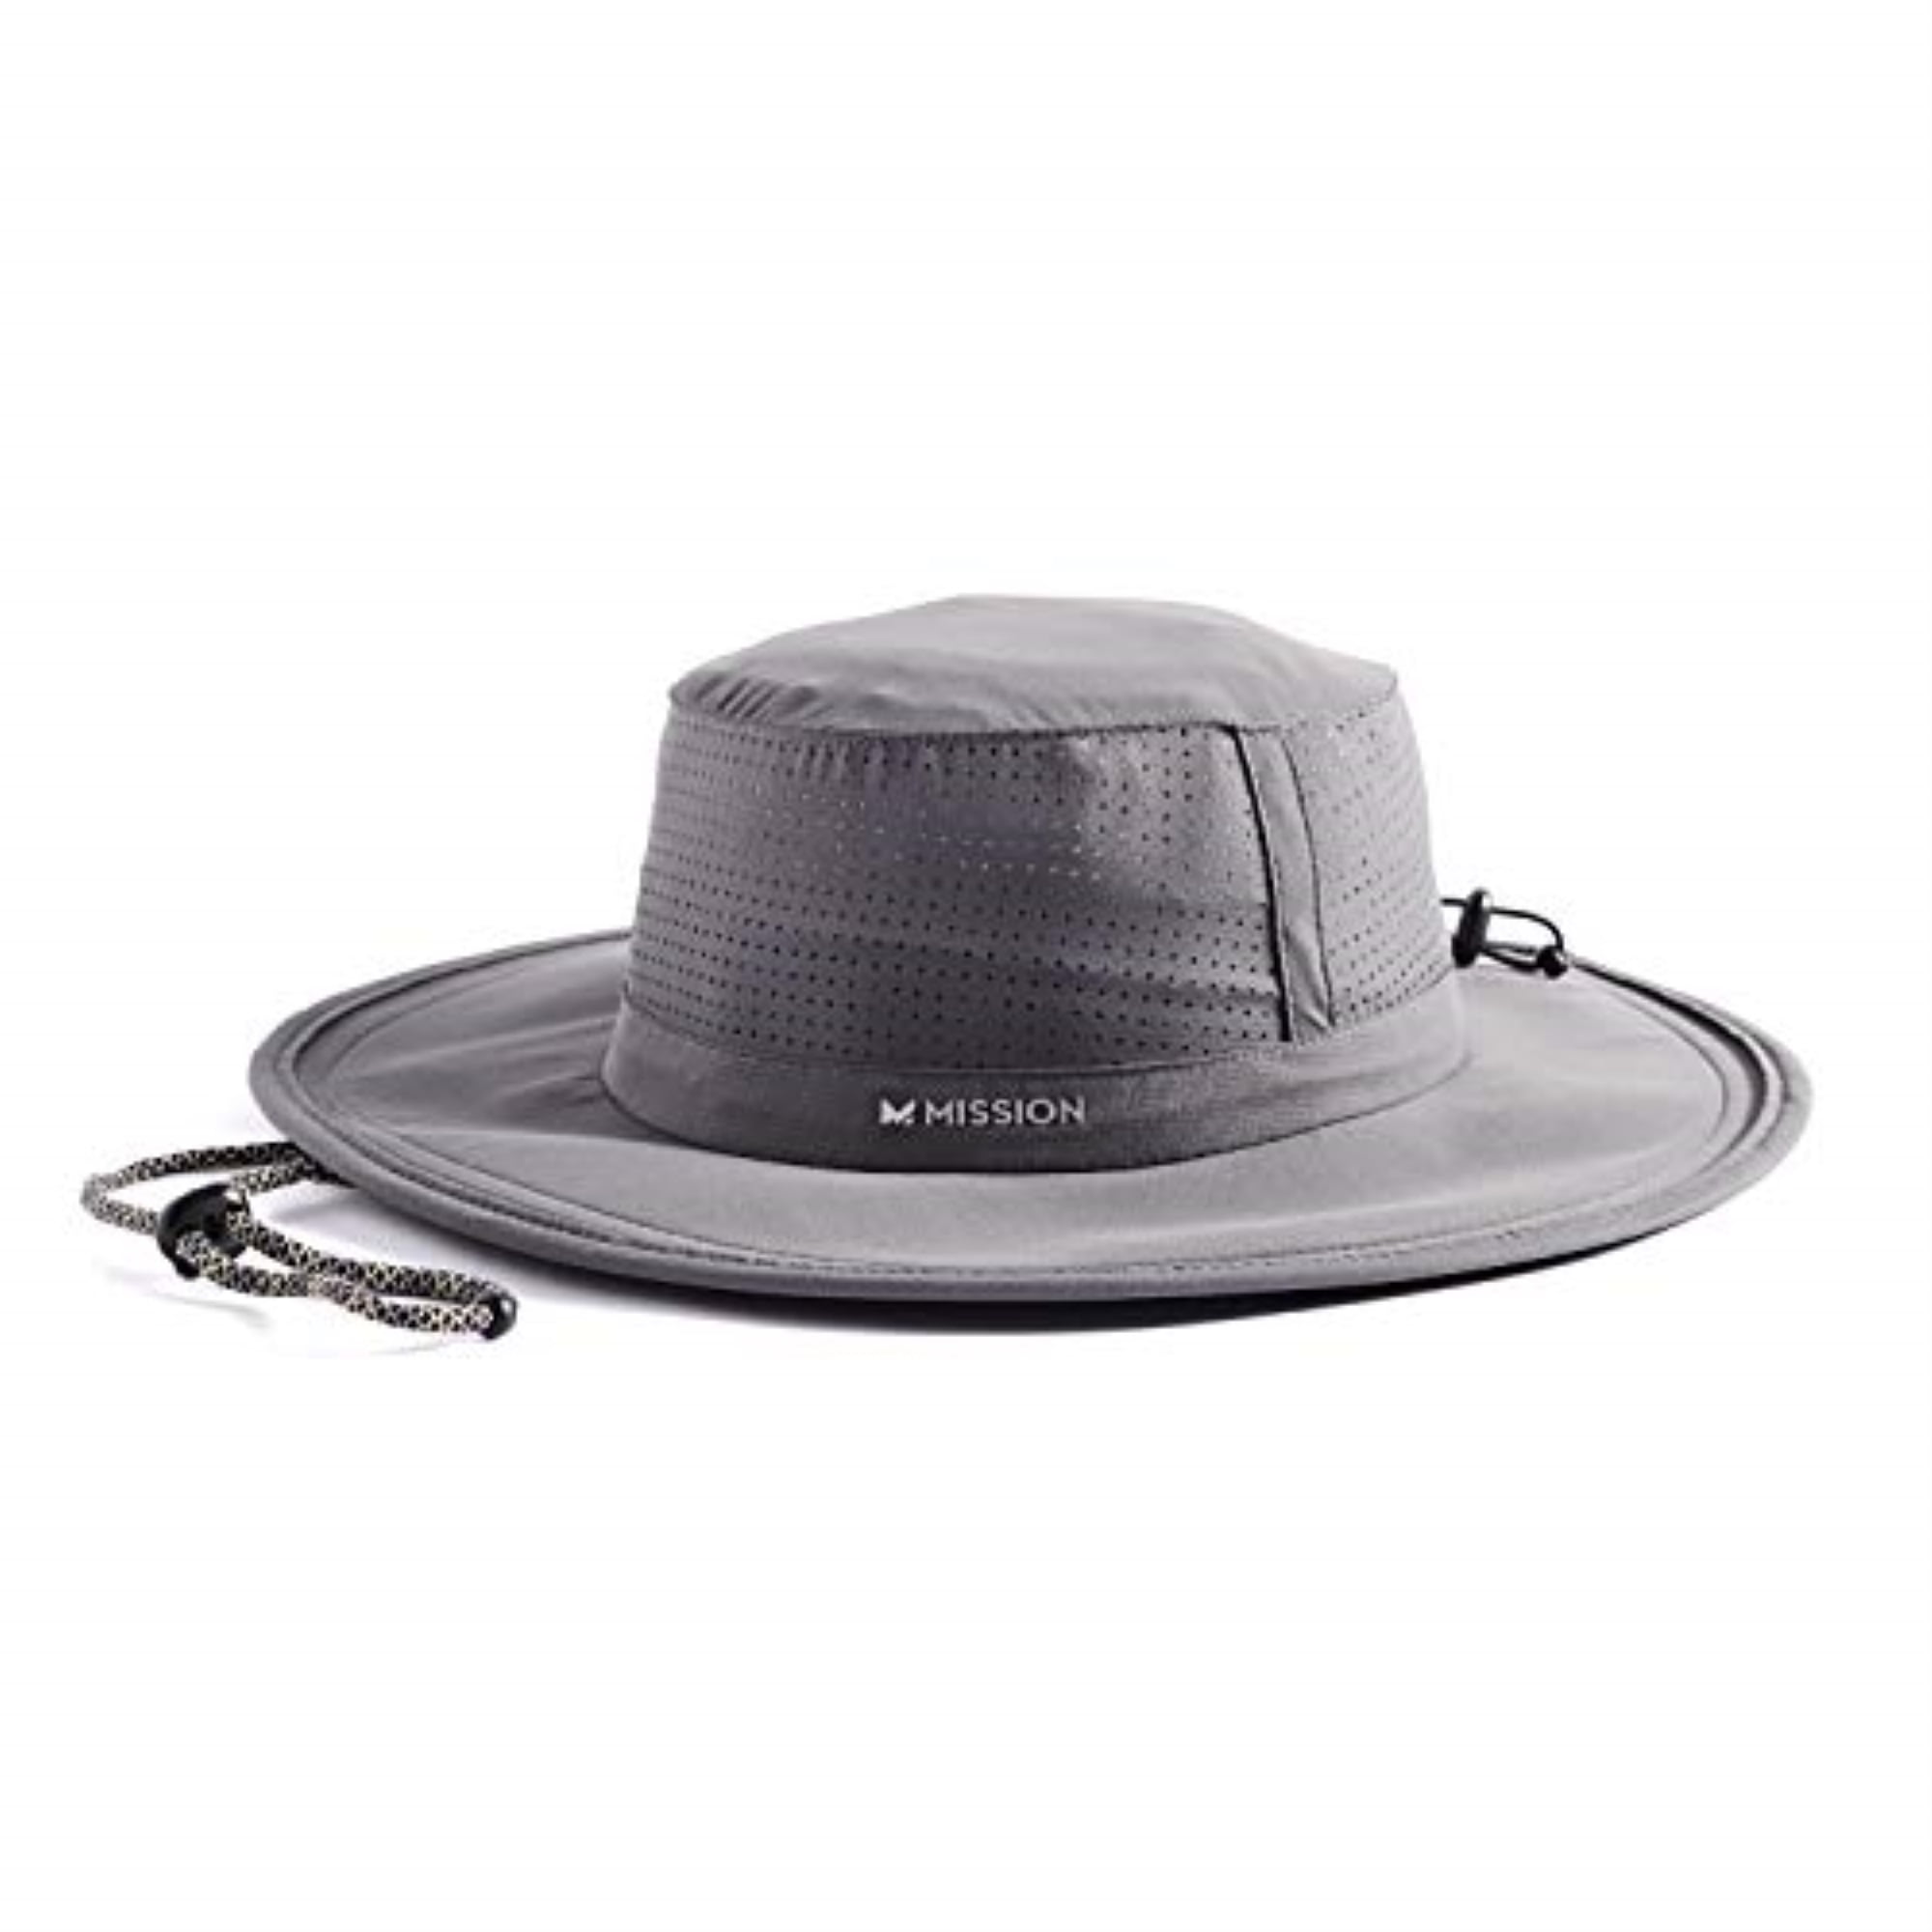 Buy Usdstore MISSION Cooling Booney Hat- UPF 50, 3” Wide Brim, Adjustable  Fit, Mesh Design for Maximum Airflow and Cools When Wet online